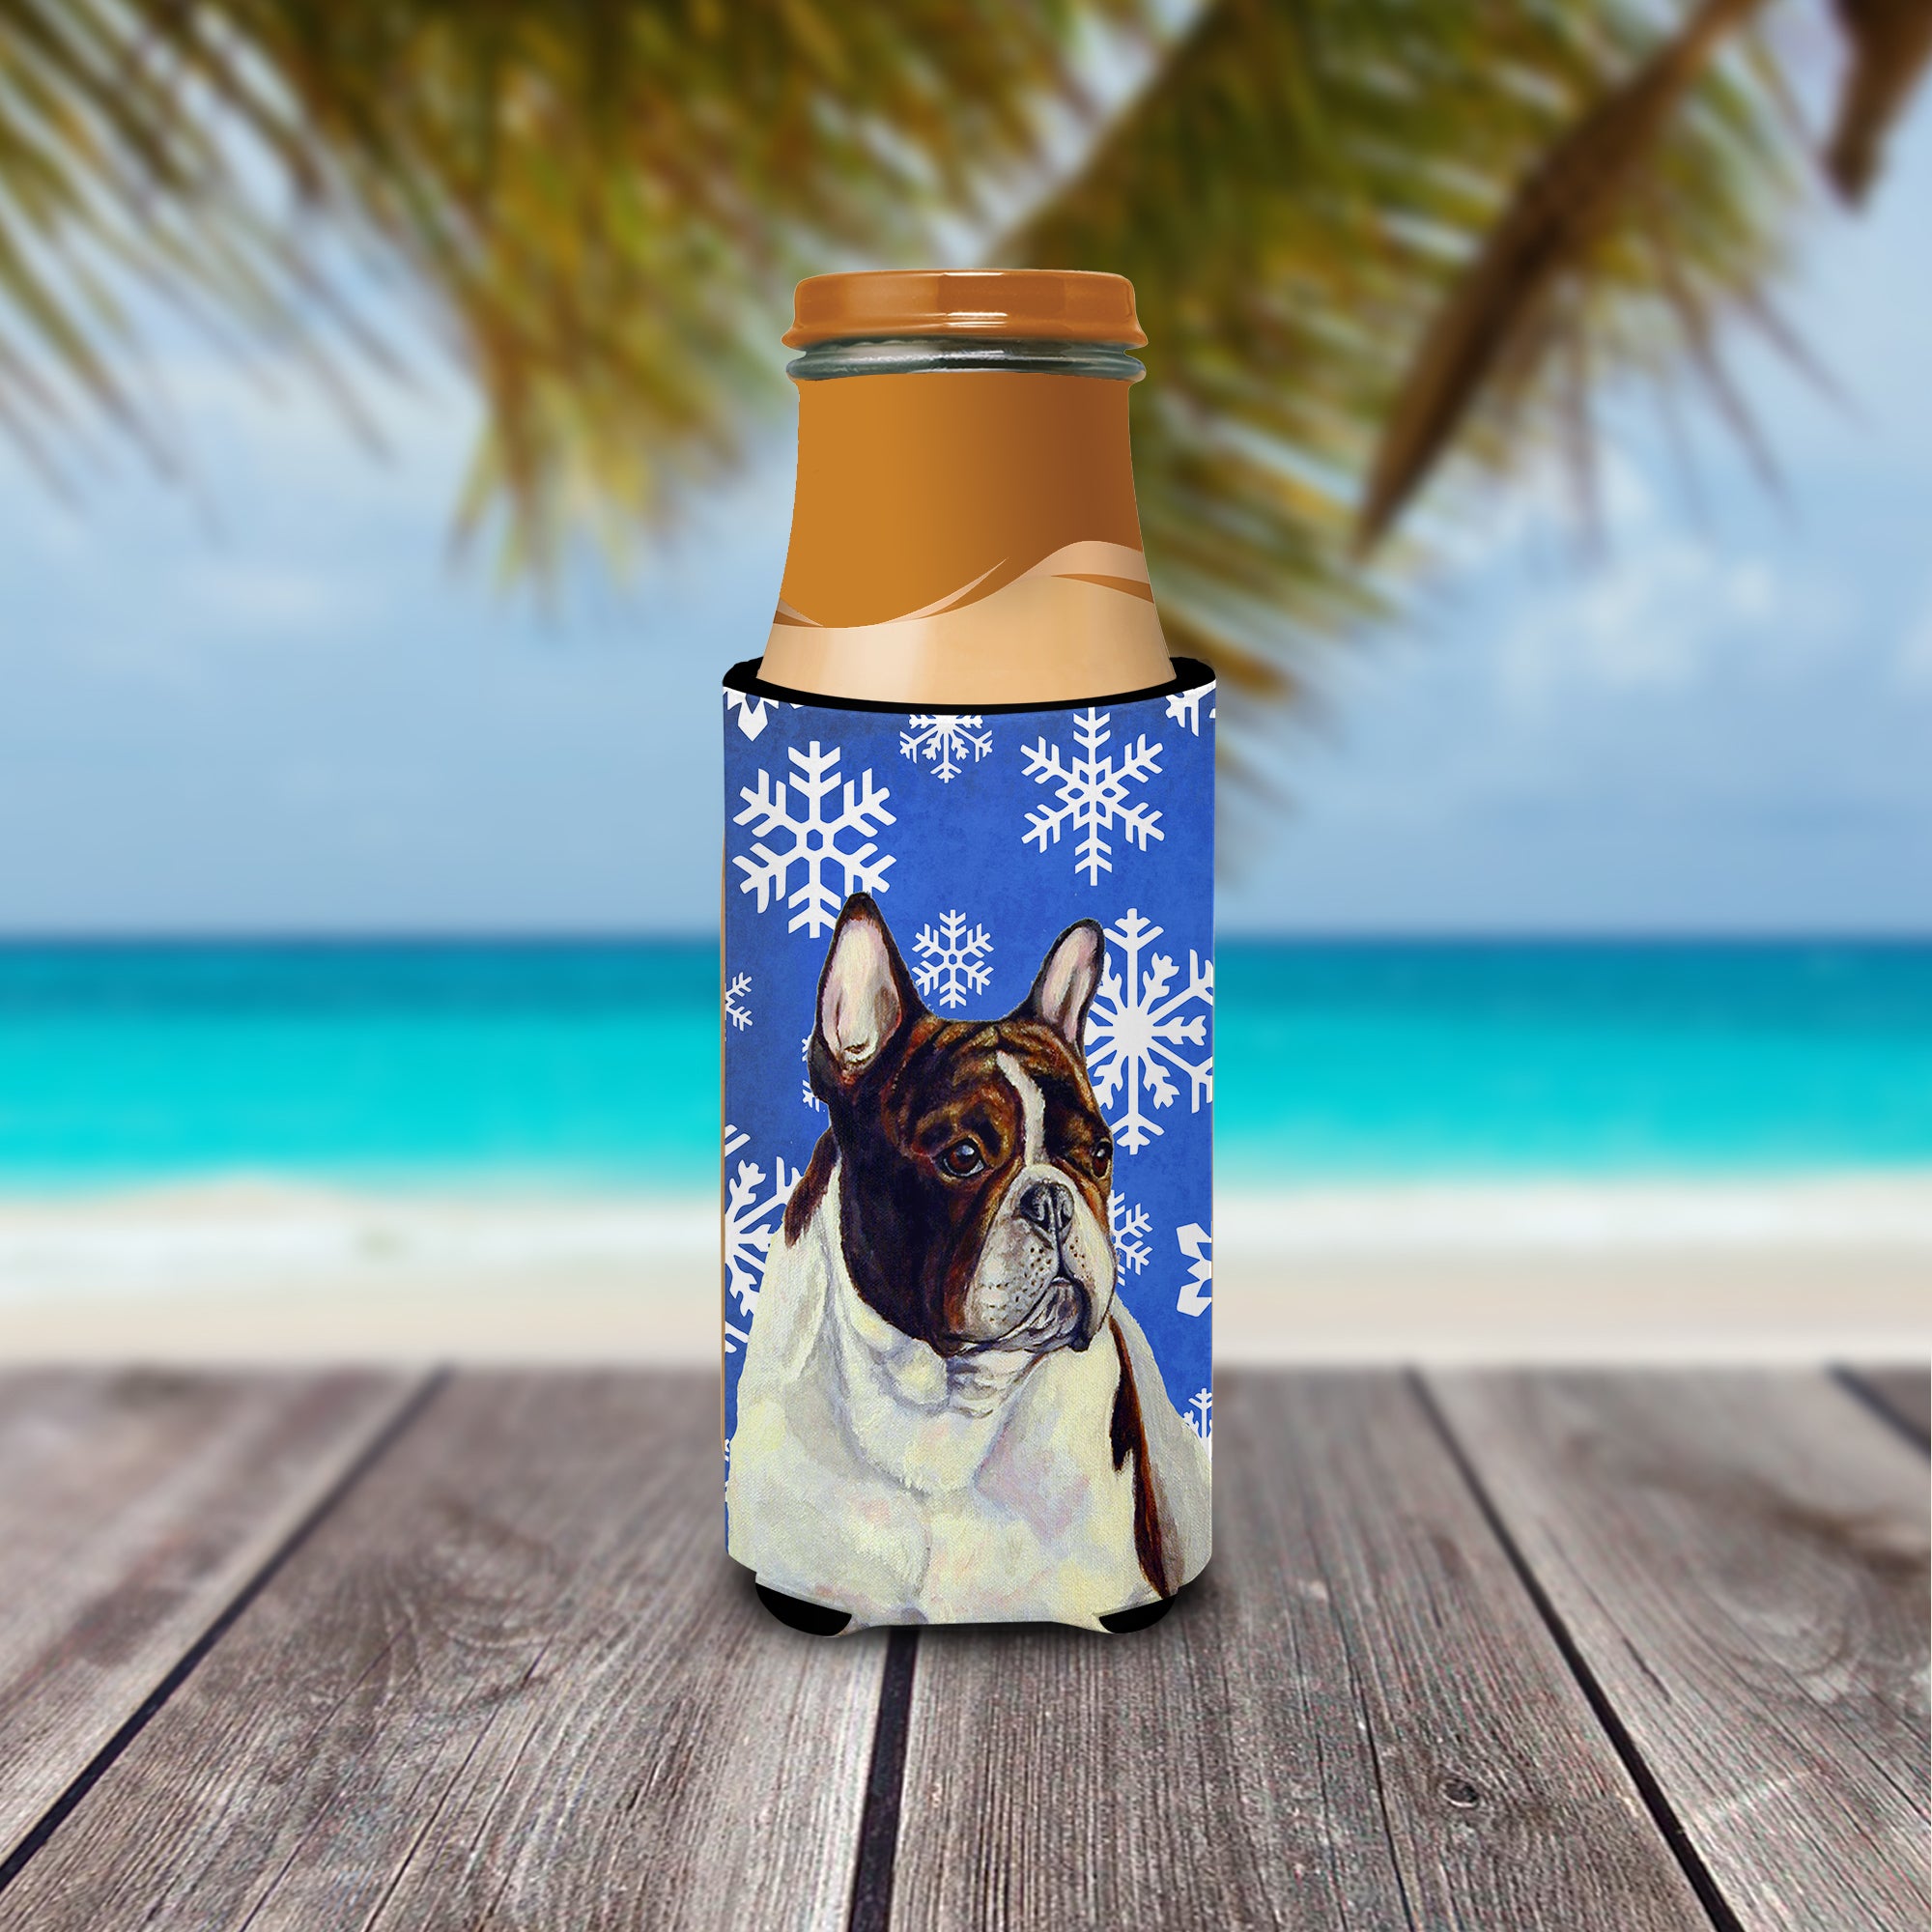 French Bulldog Winter Snowflakes Holiday Ultra Beverage Insulators for slim cans LH9292MUK.